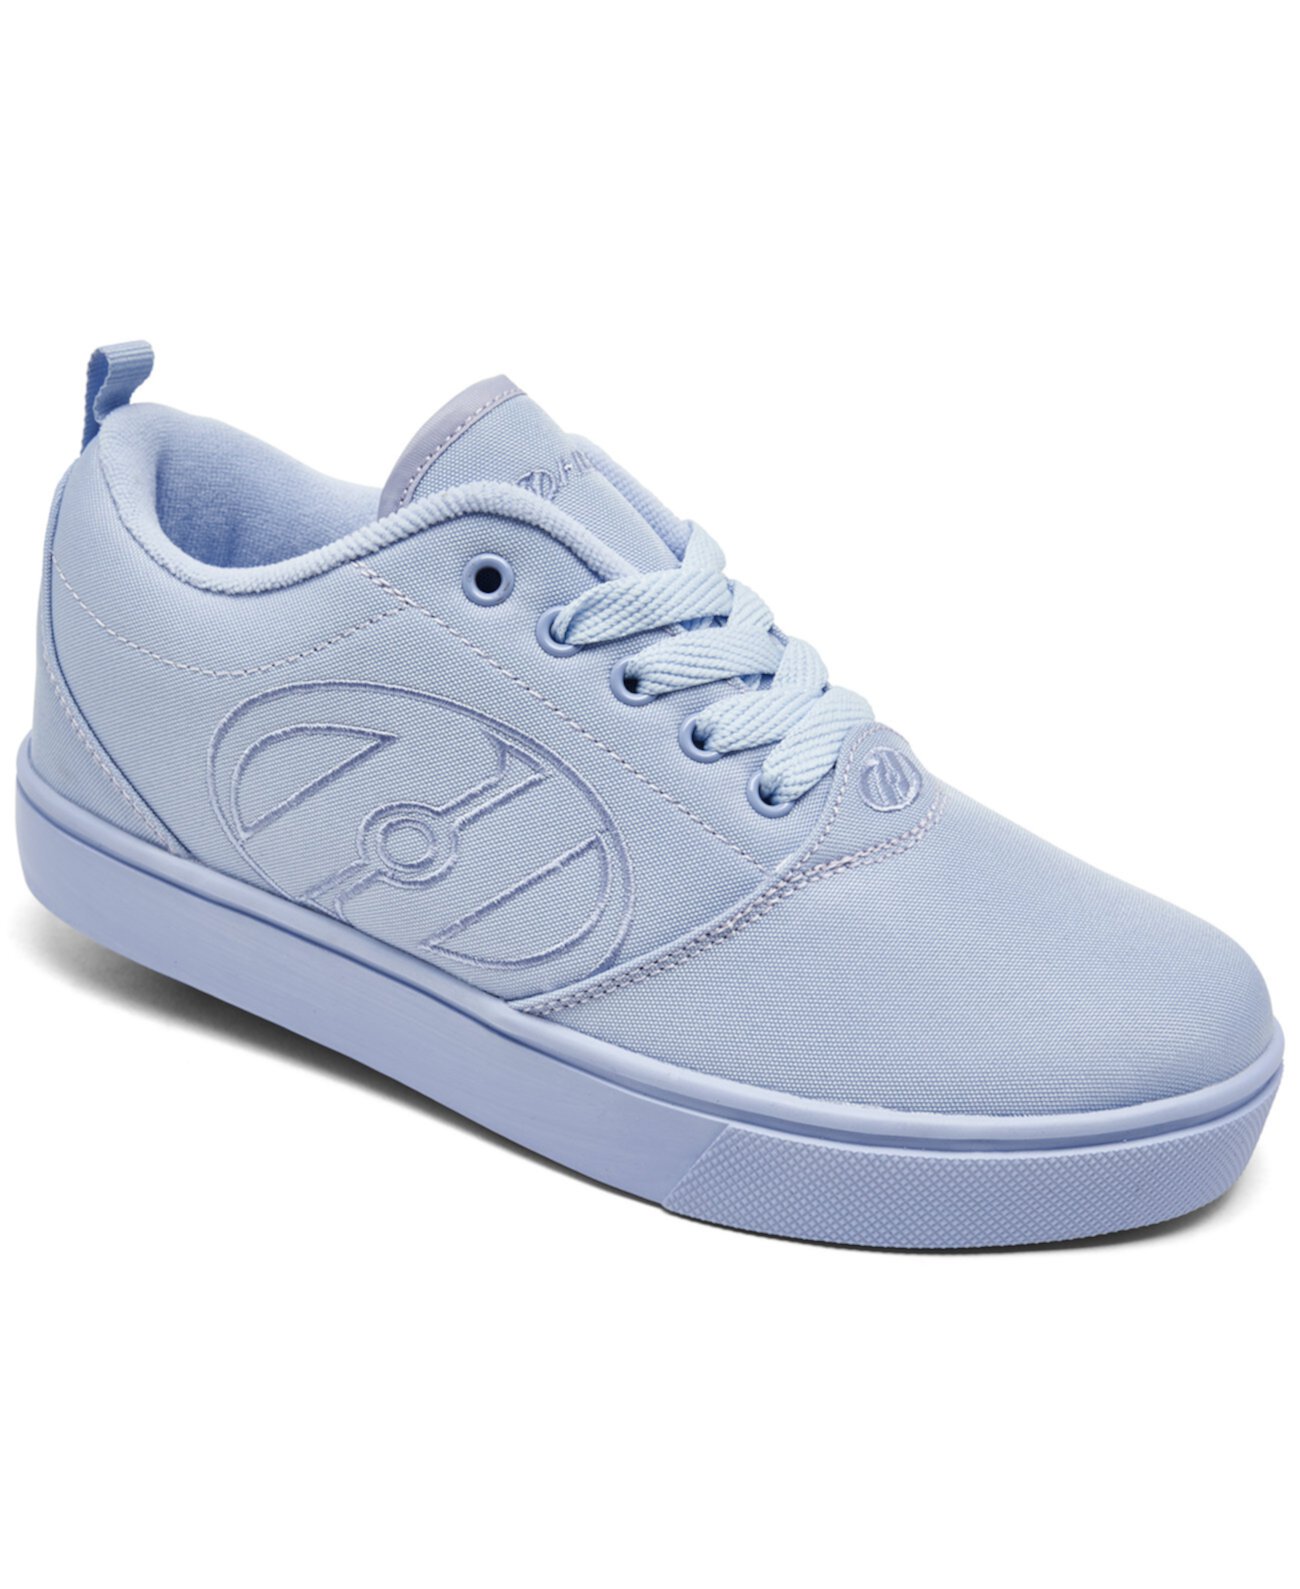 Little Girls Pro 20 Wheeled Skate Casual Sneakers from Finish Line Heelys